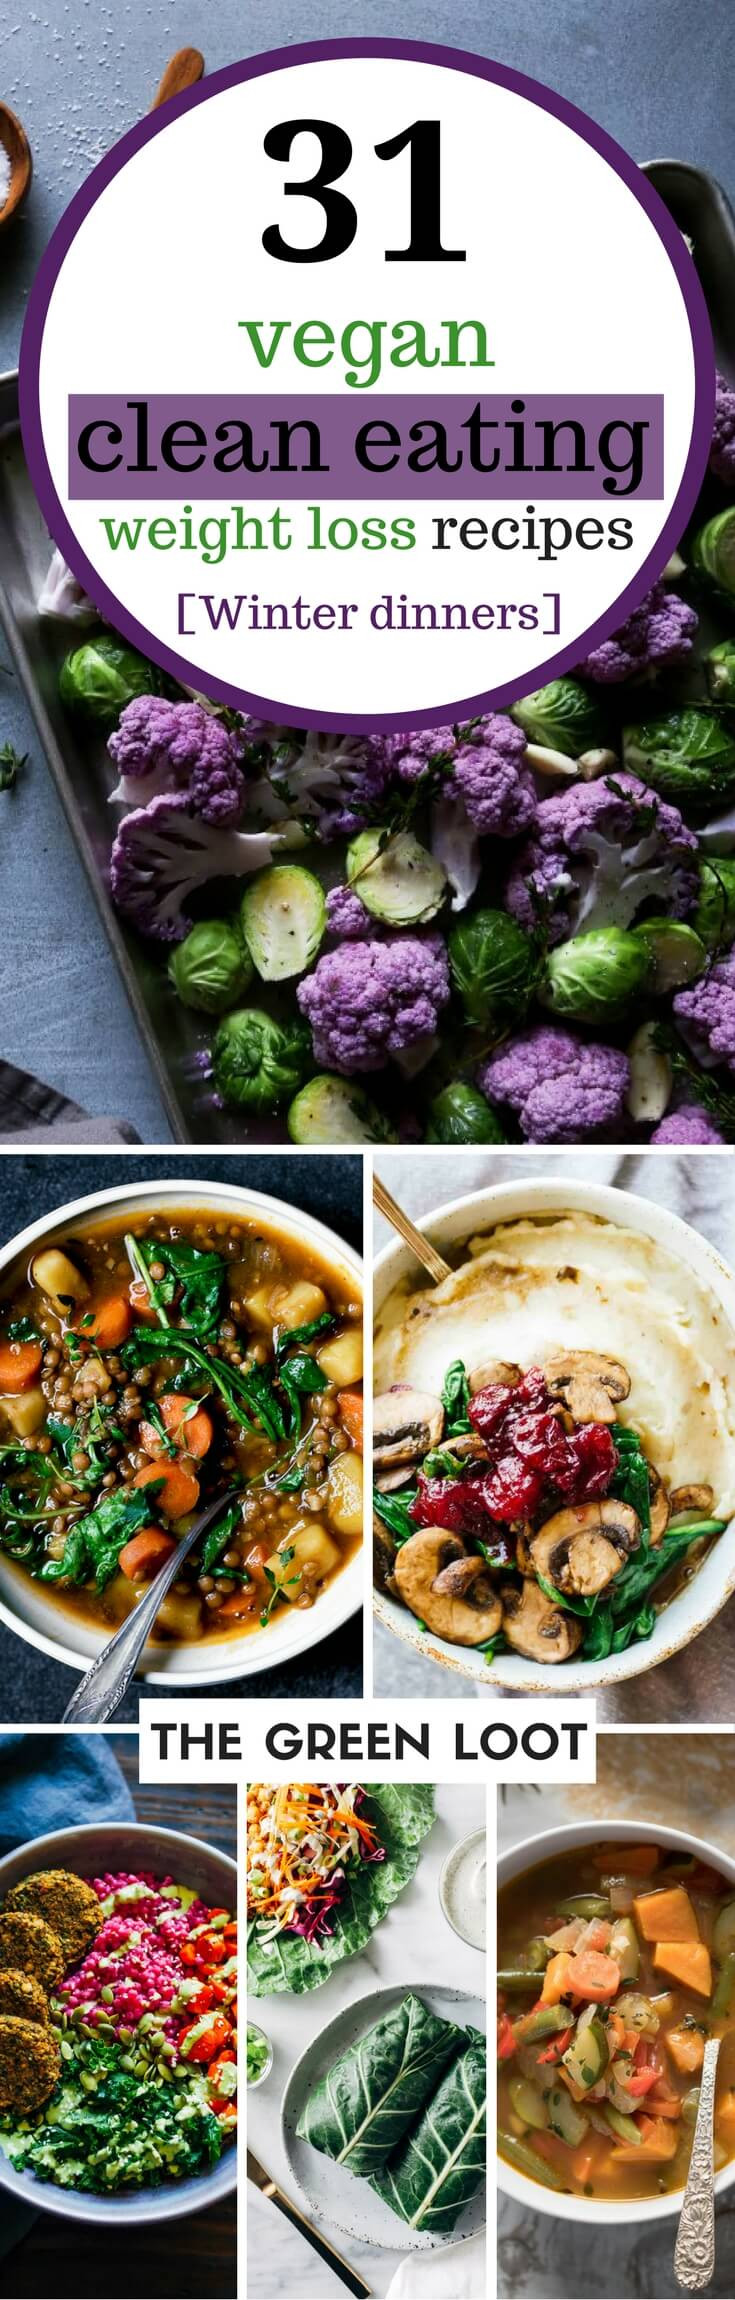 Healthy Vegetarian Dinner Recipes For Weight Loss
 The Best 31 Delish Vegan Clean Eating Recipes for Weight